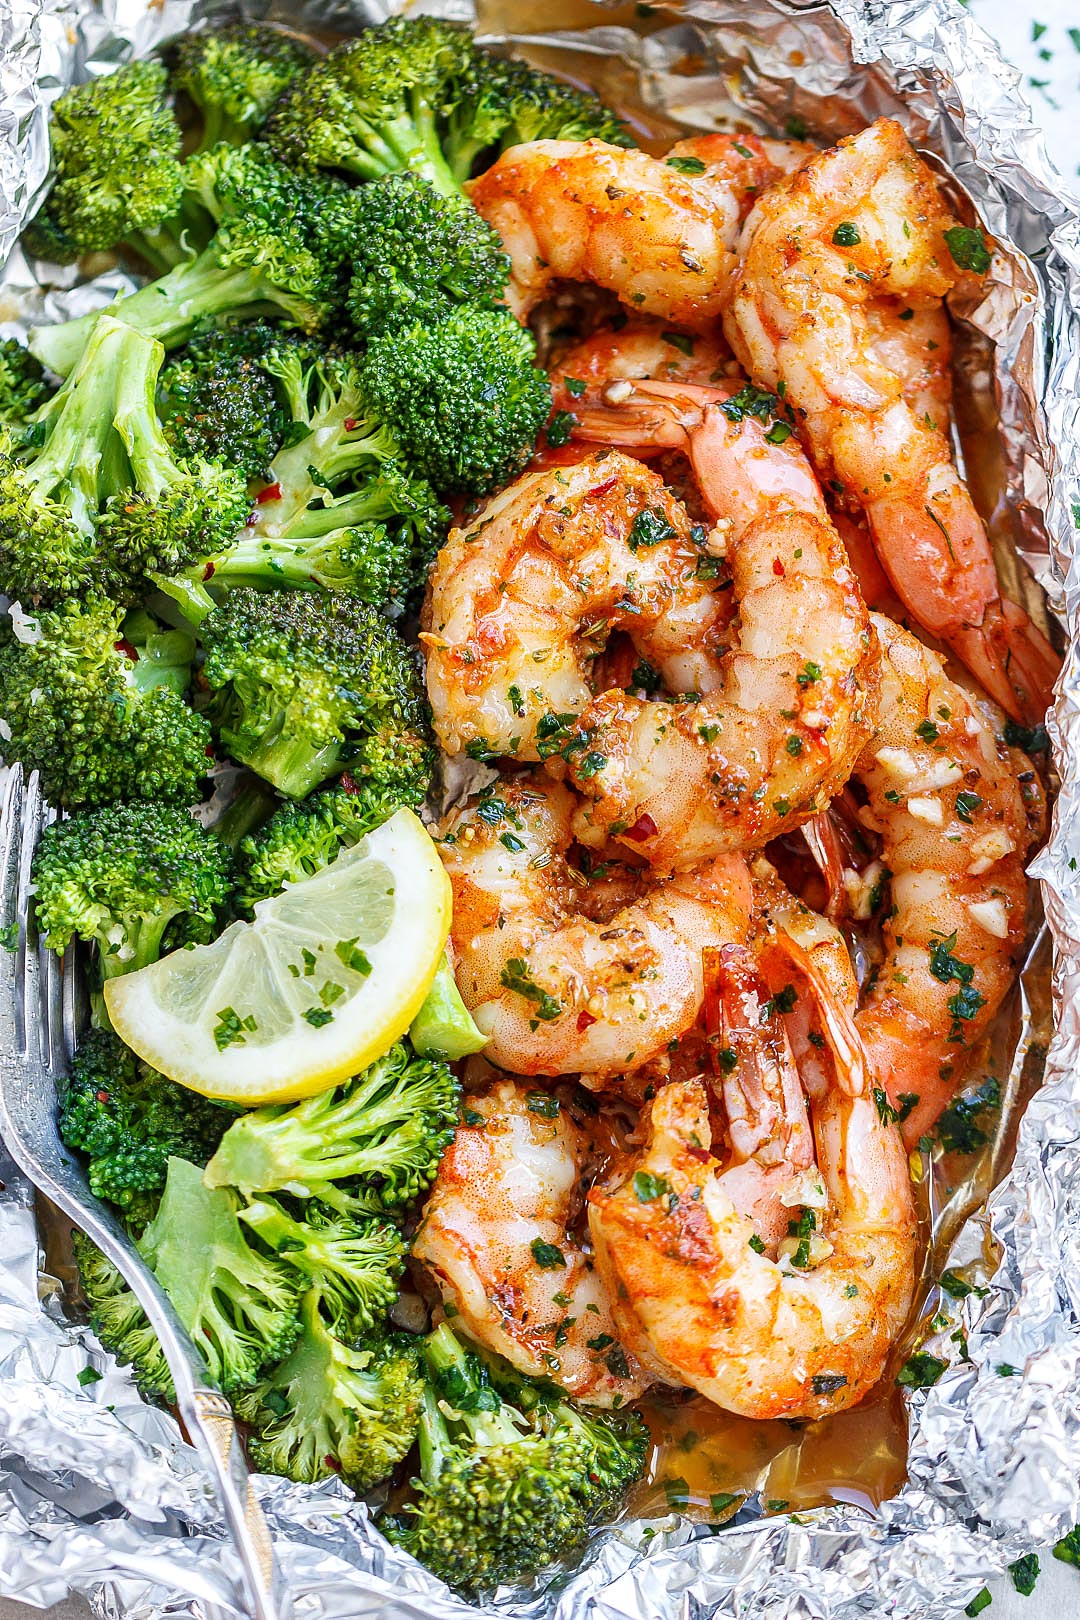 Baked Shrimp and Broccoli Foil Packs with Garlic Lemon Butter Sauce -  low calorie recipes